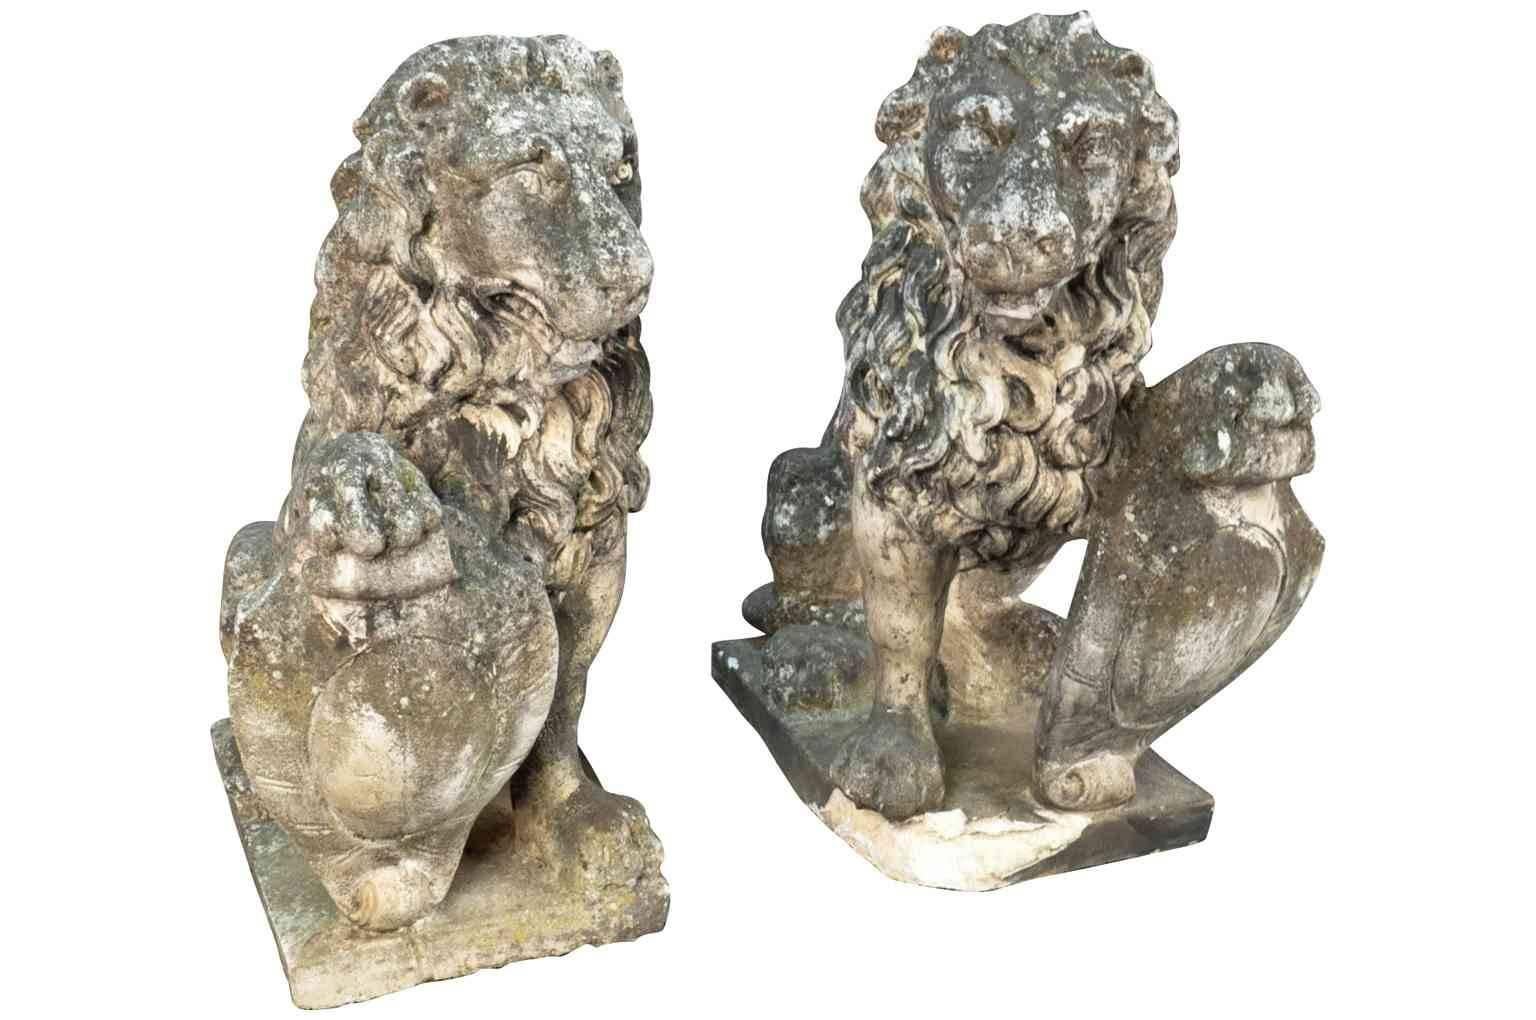 A stunning pair of 19th century lions carved from stone. Beautiful detail of head and mane, seated on plinths holding shields. Gorgeous patina. Wonderful at any entryway or as interior decoration.